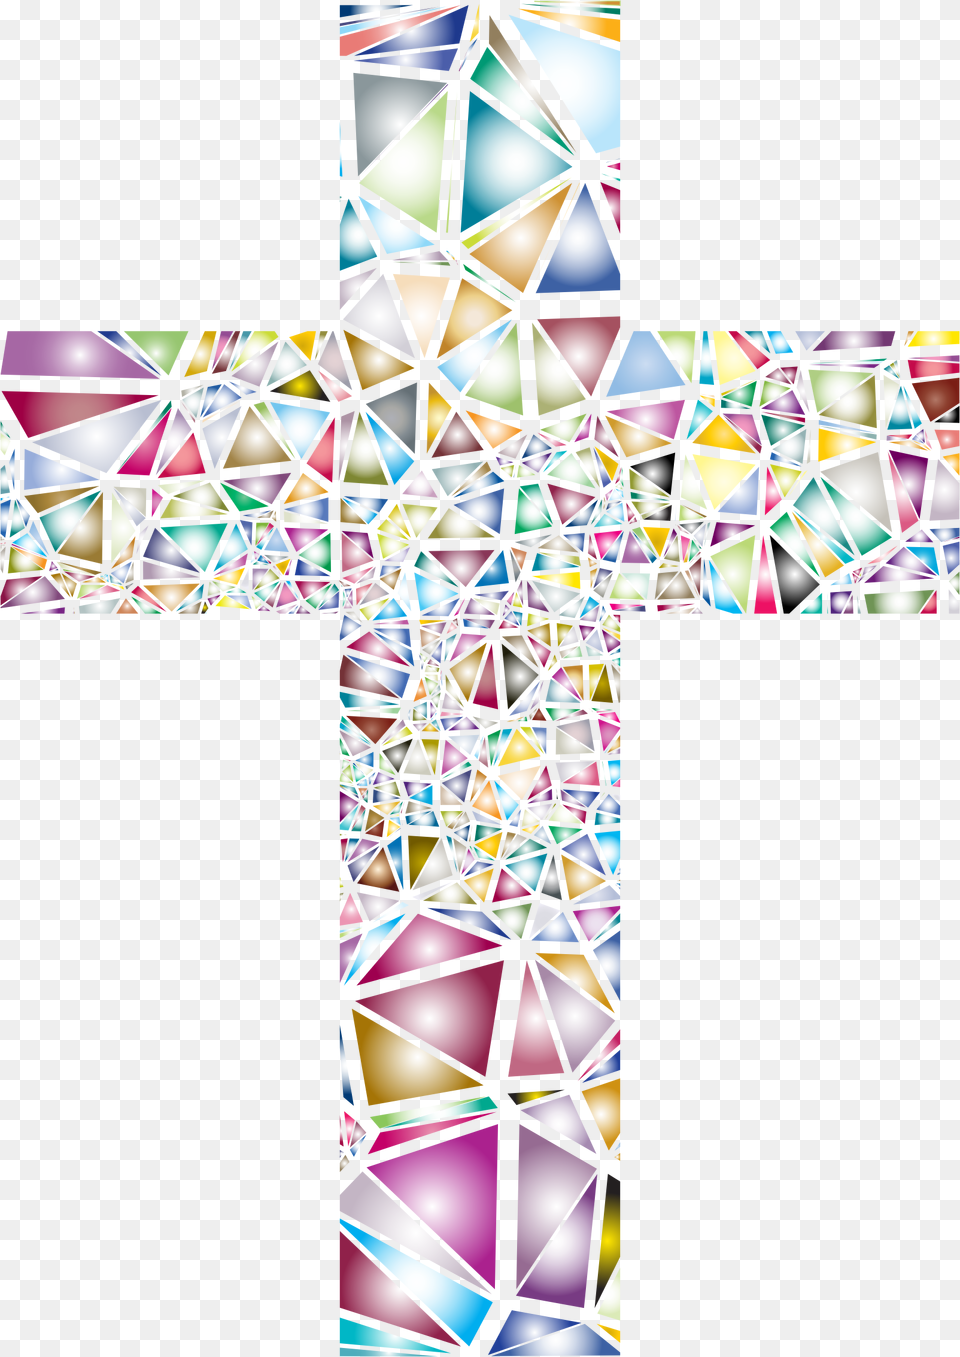 This Icons Design Of Low Poly Stained Glass Stained Glass No Background, Art, Cross, Symbol, Chandelier Png Image